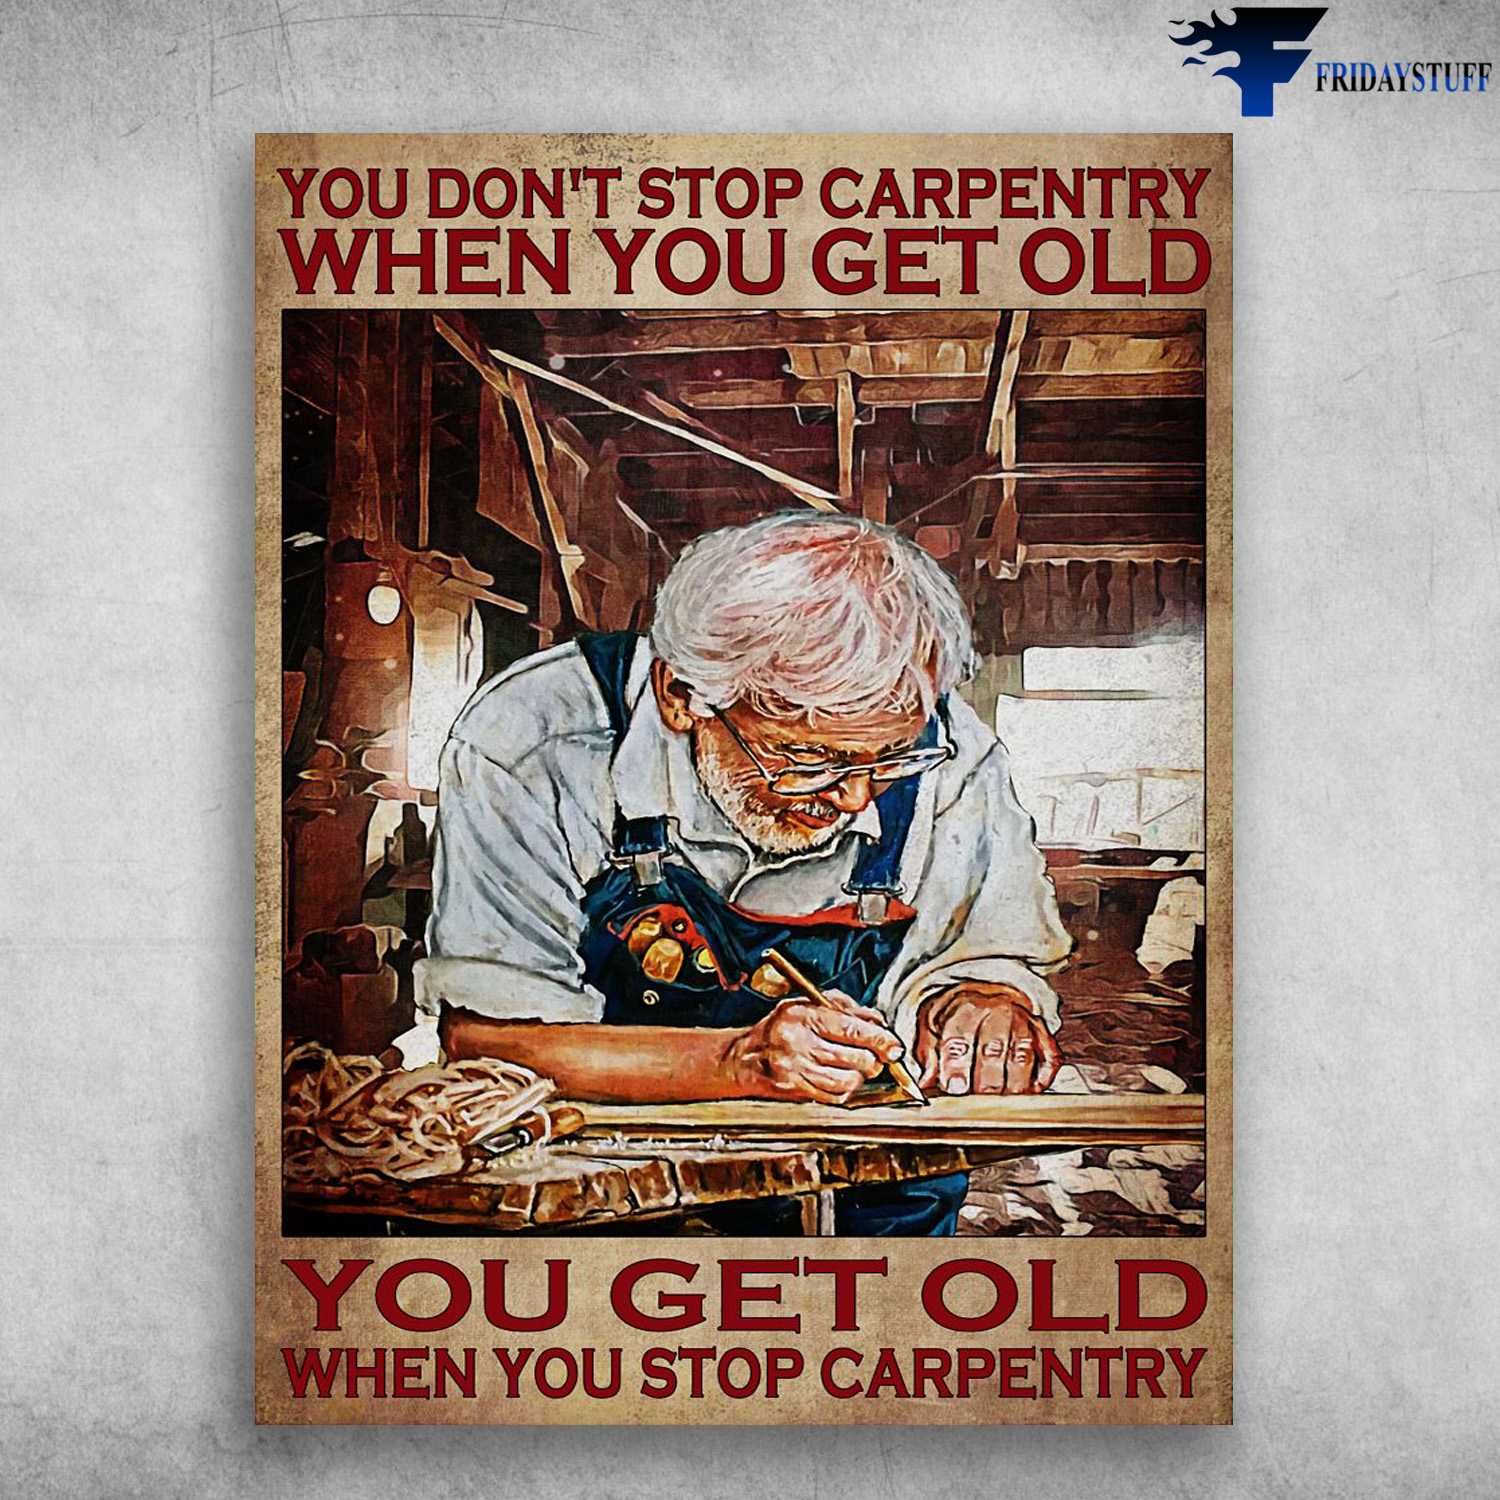 Old Carpenter, Carpenter's Gift - You Don't Stop Carpentry When You Get Old, You Get Old When You Stop Carpentry